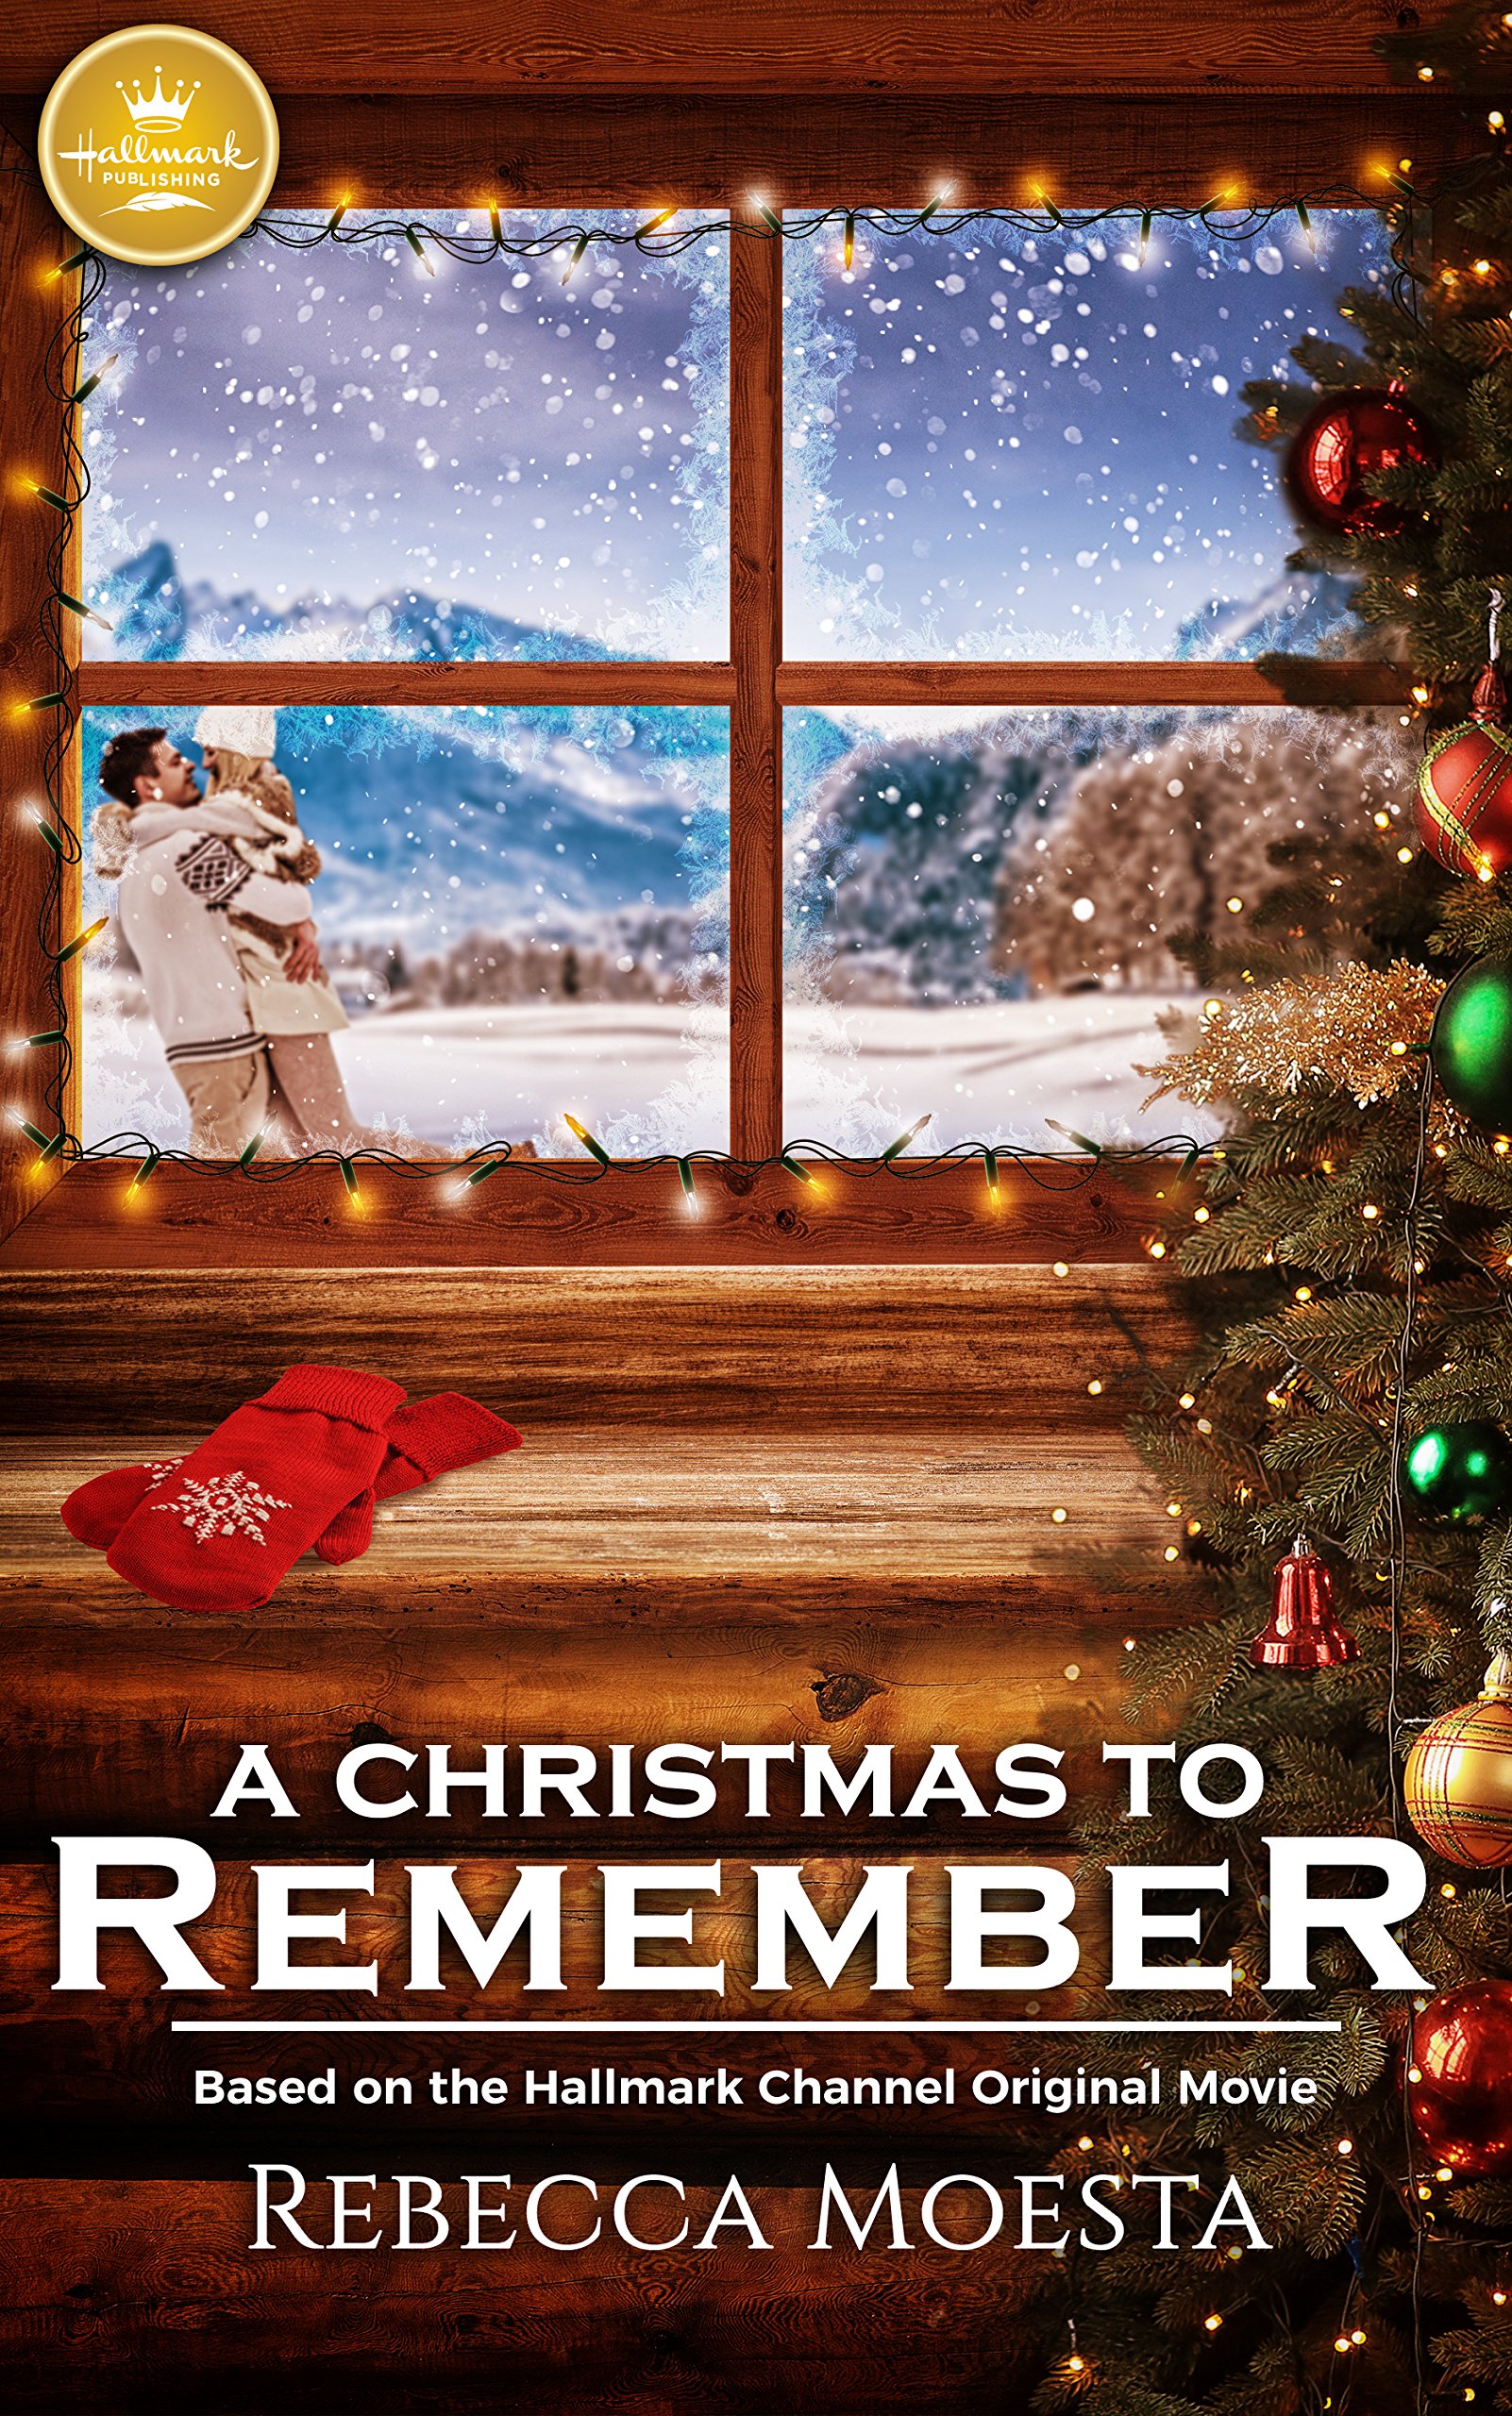 A Christmas to Remember: Based on the Hallmark Channel Original Movie